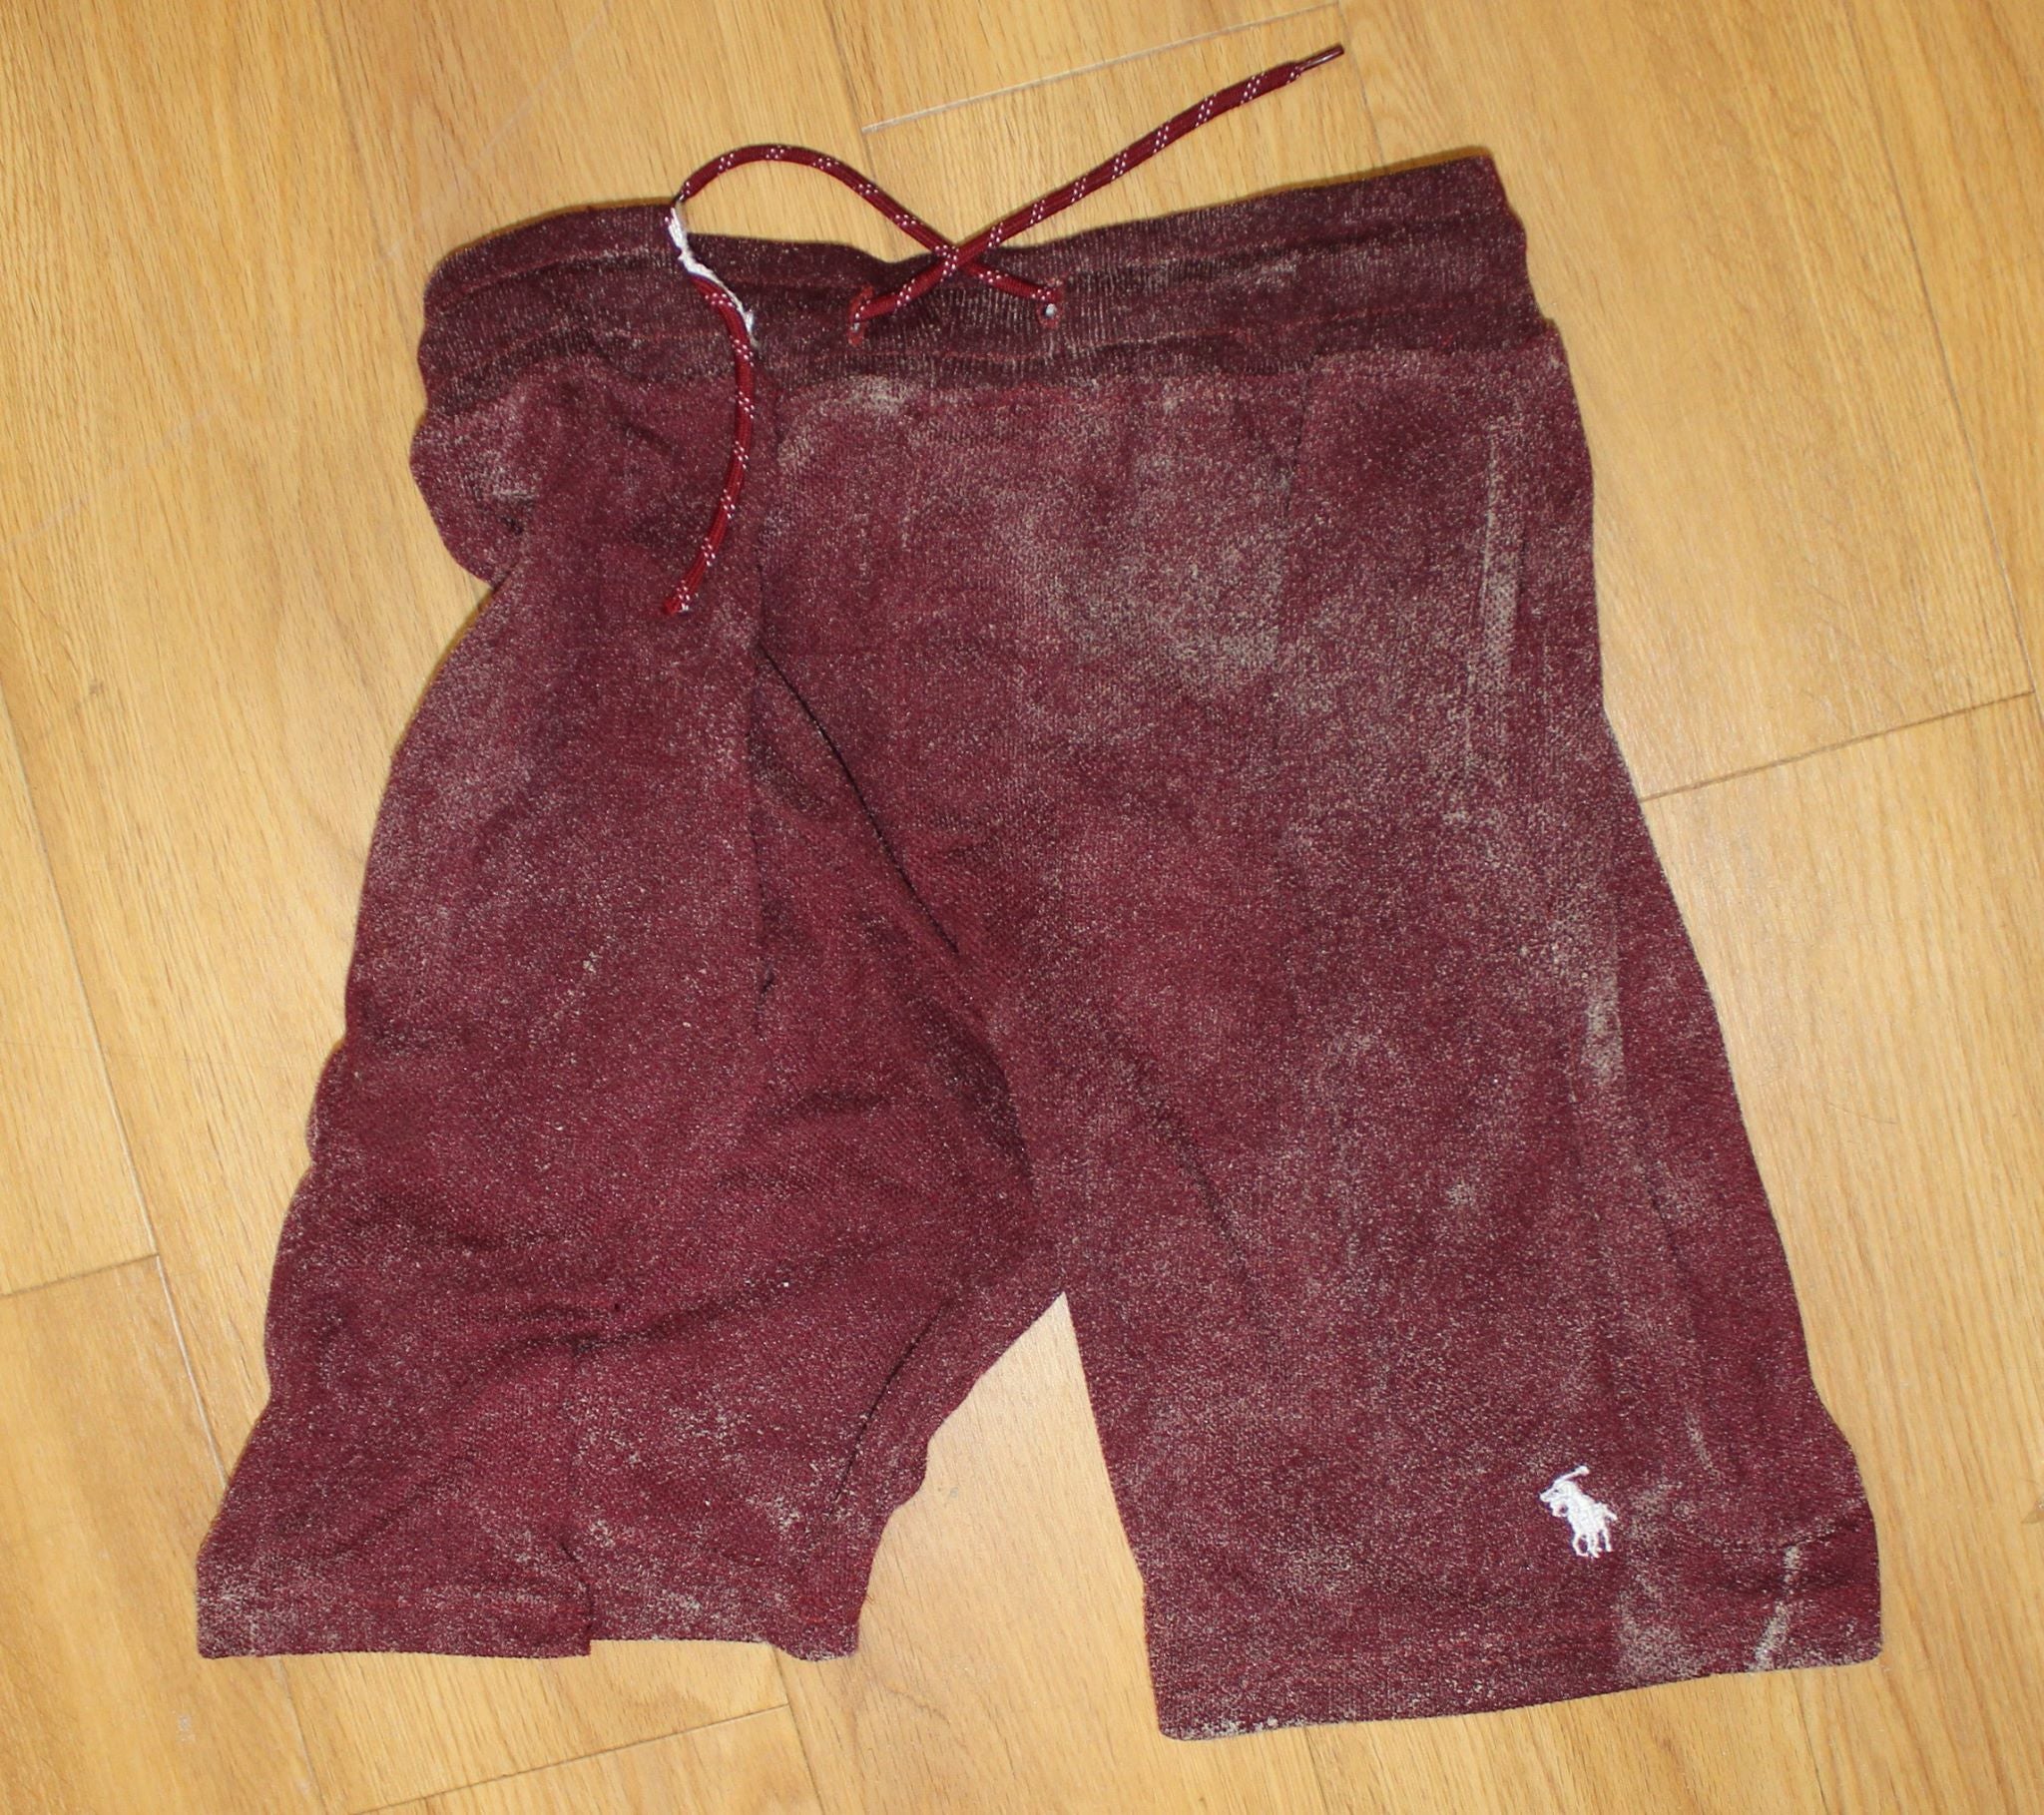  Police say the unidentified man was wearing these maroon Polo shorts. (Image courtesy of the North Wildwood Police Department) 